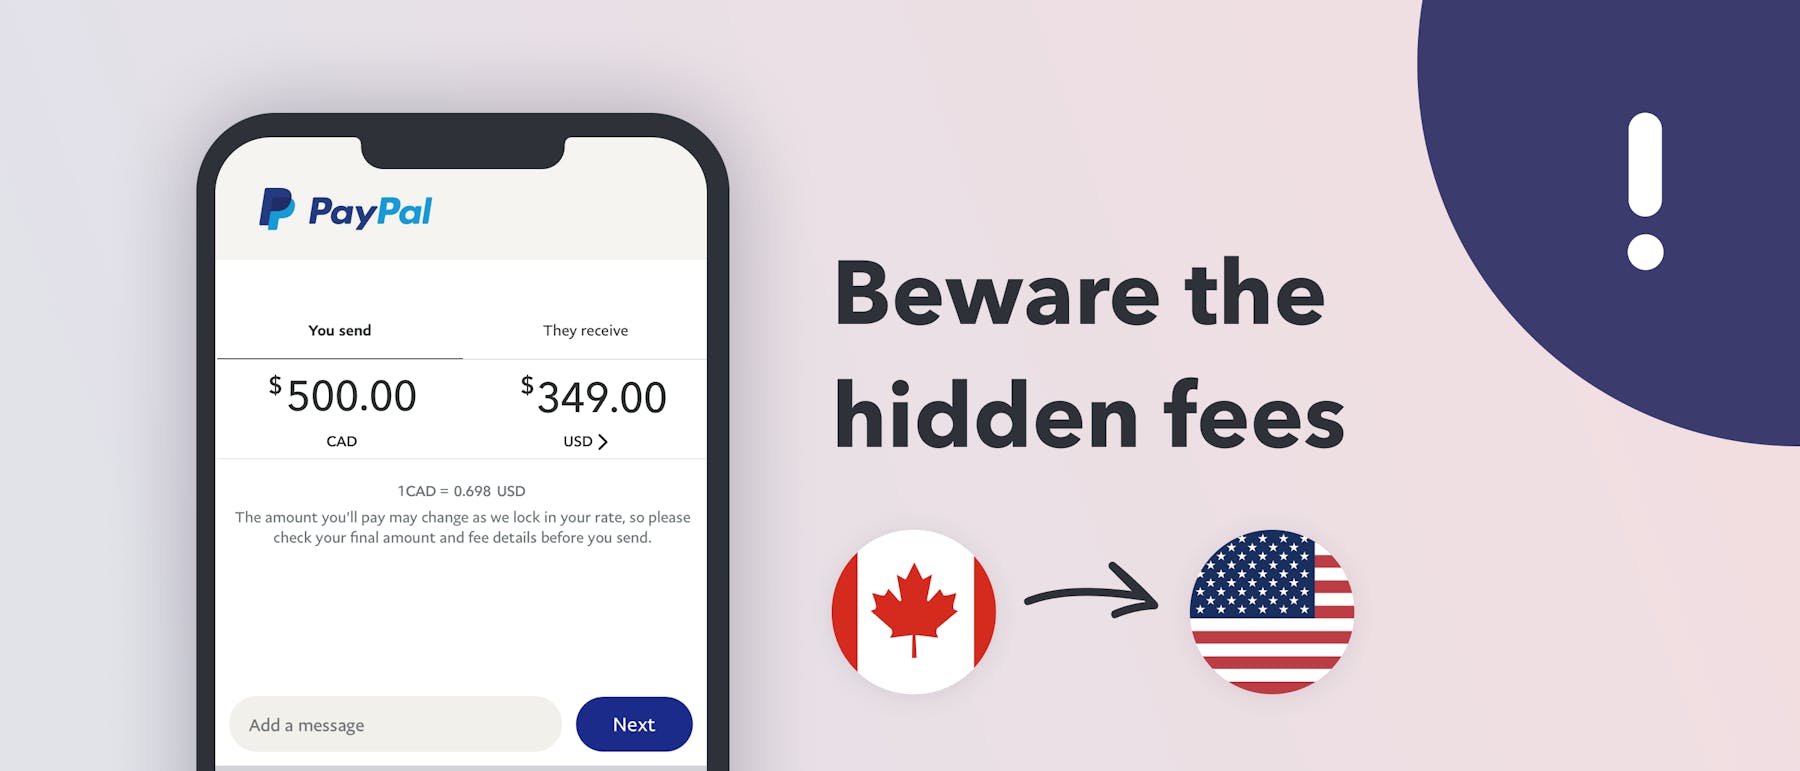 Paypal Money Transfer Fees from Canada to the US analyzed by Monito